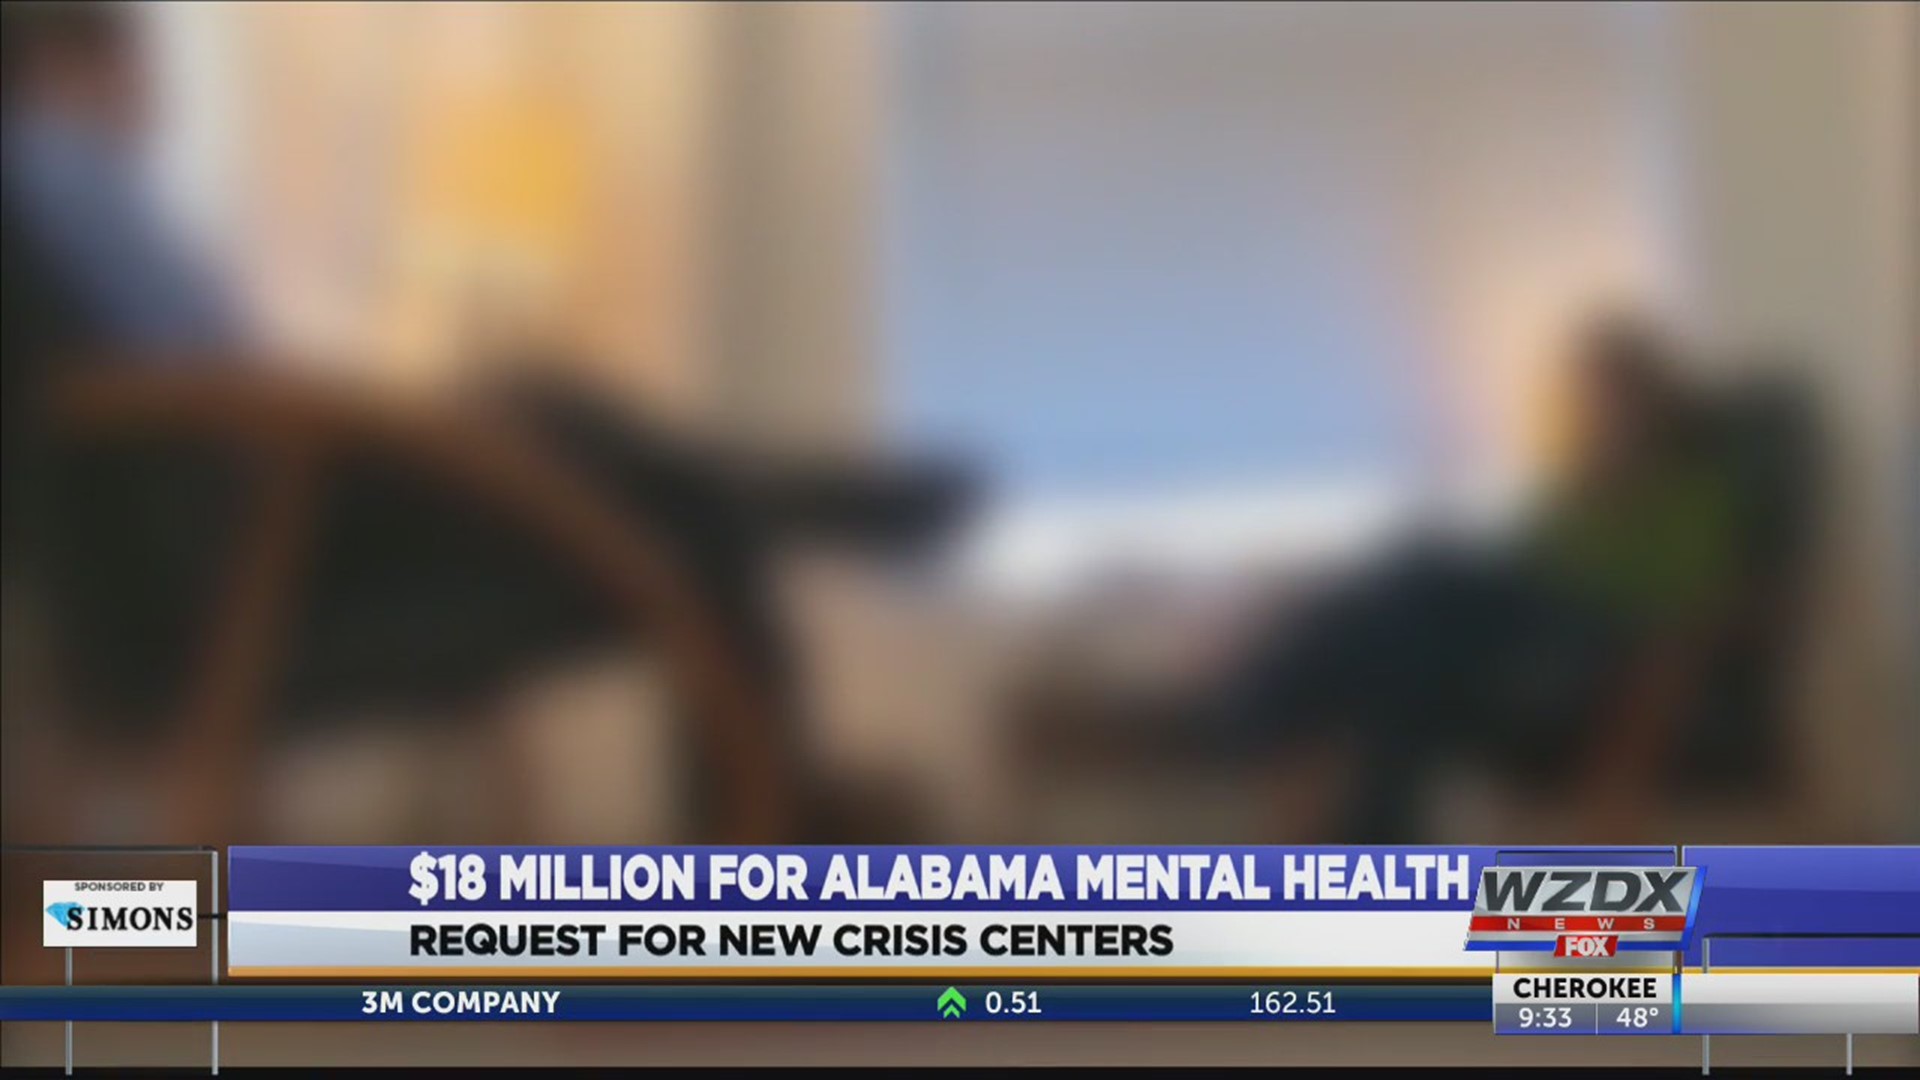 The Alabama Department of Mental Health plans to ask the state for 18 million dollars for new mental health resources during the Alabama 2020 Legislative Session.